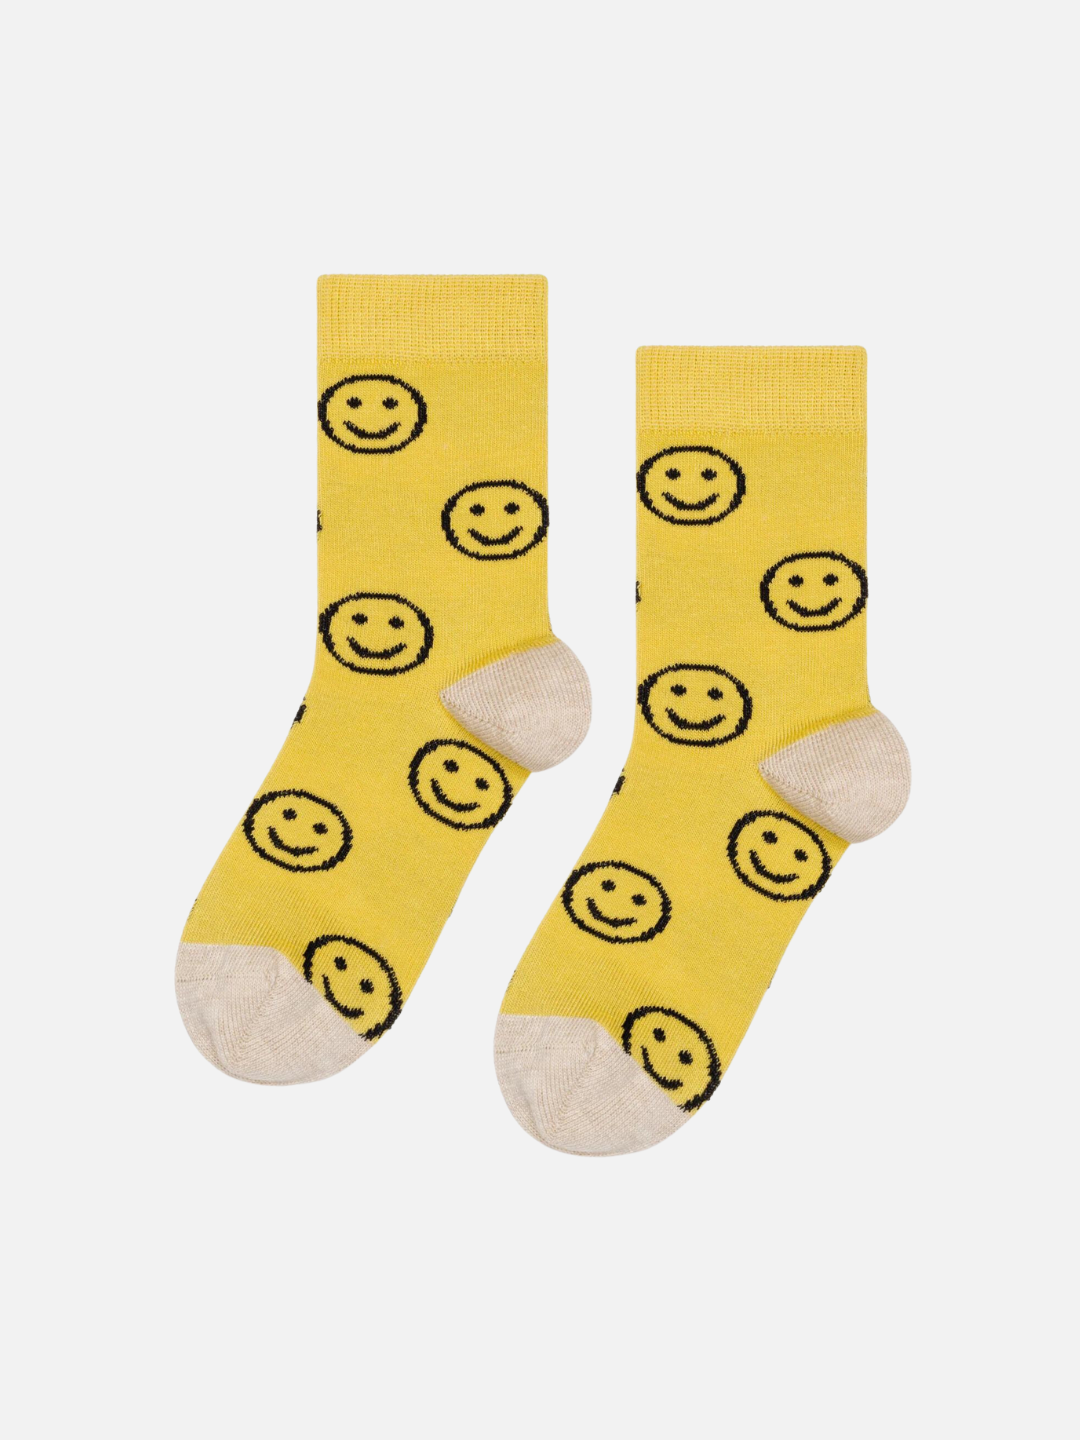 A pair of kids' ankle socks in yellow with black smileys and cream toes and heels